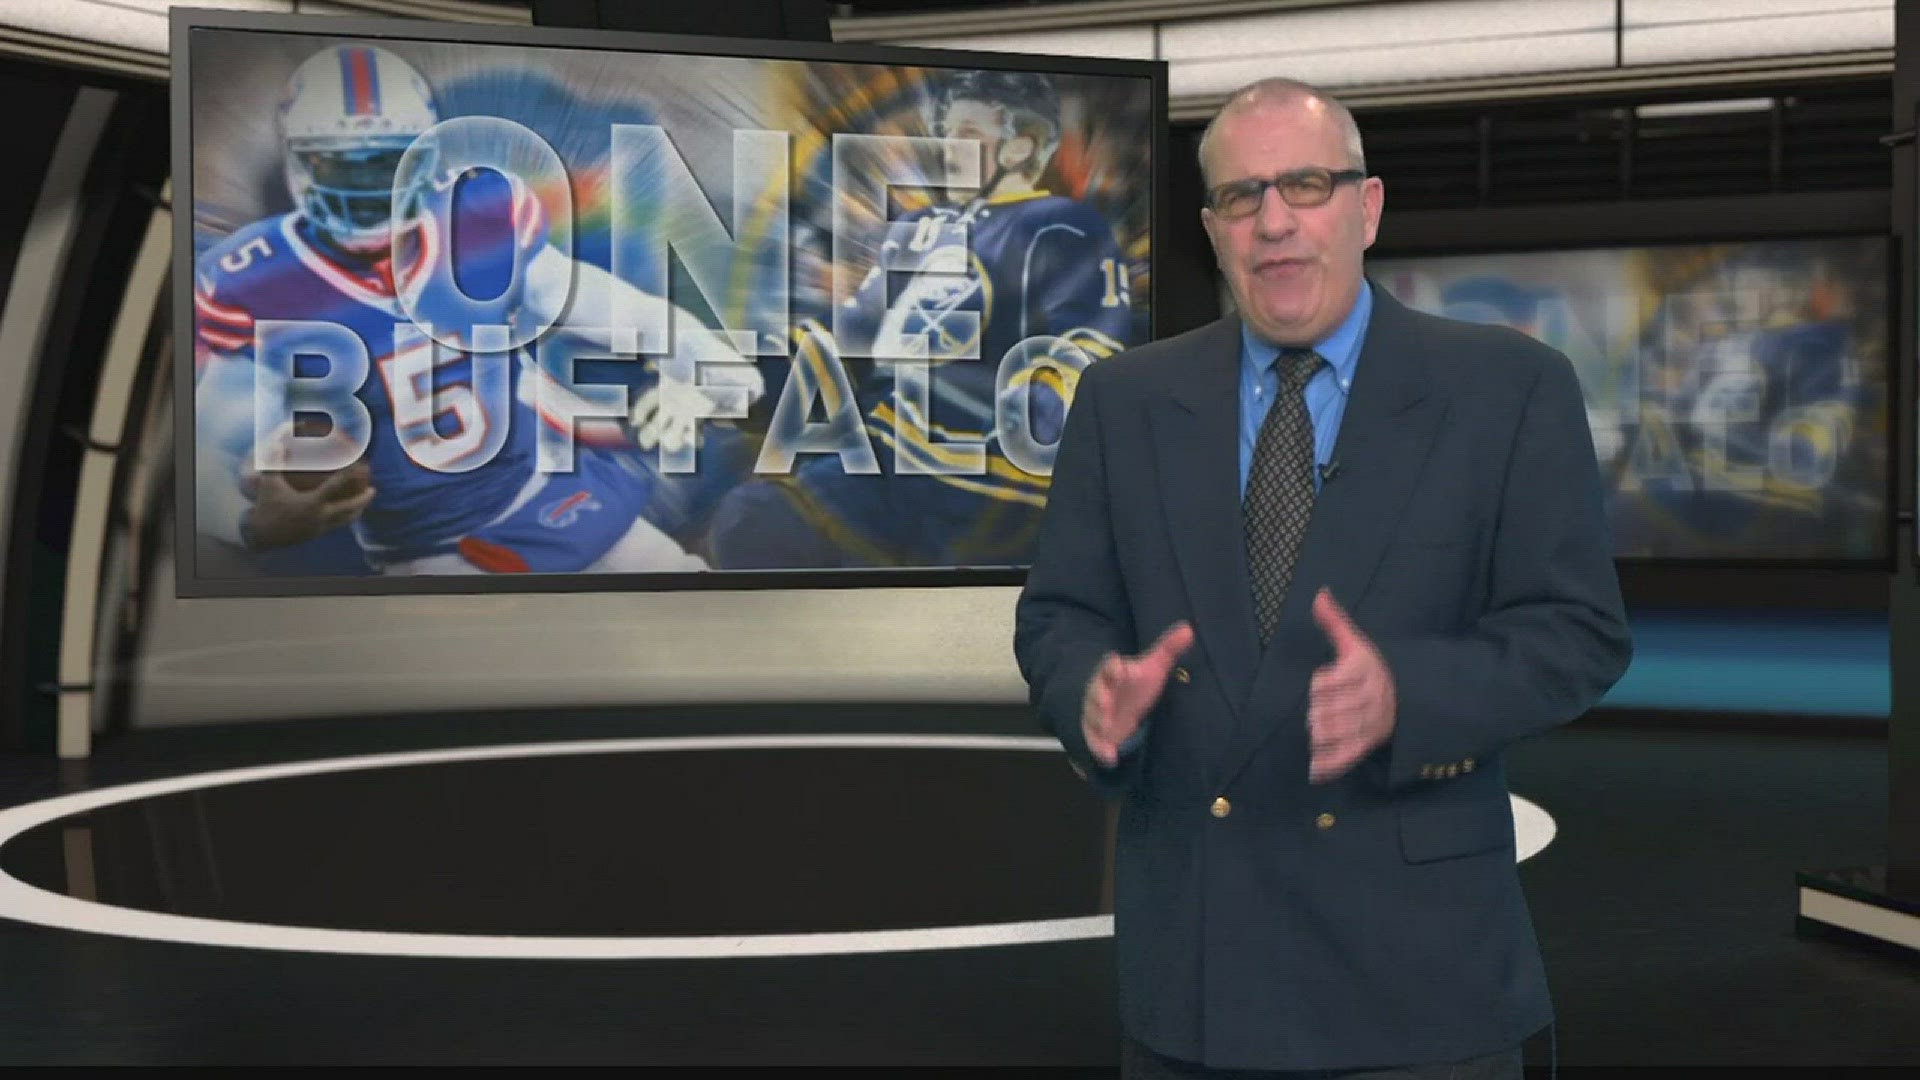 Stu Boyar shares his thoughts on the Bills and Sabres and the situations both teams are in.